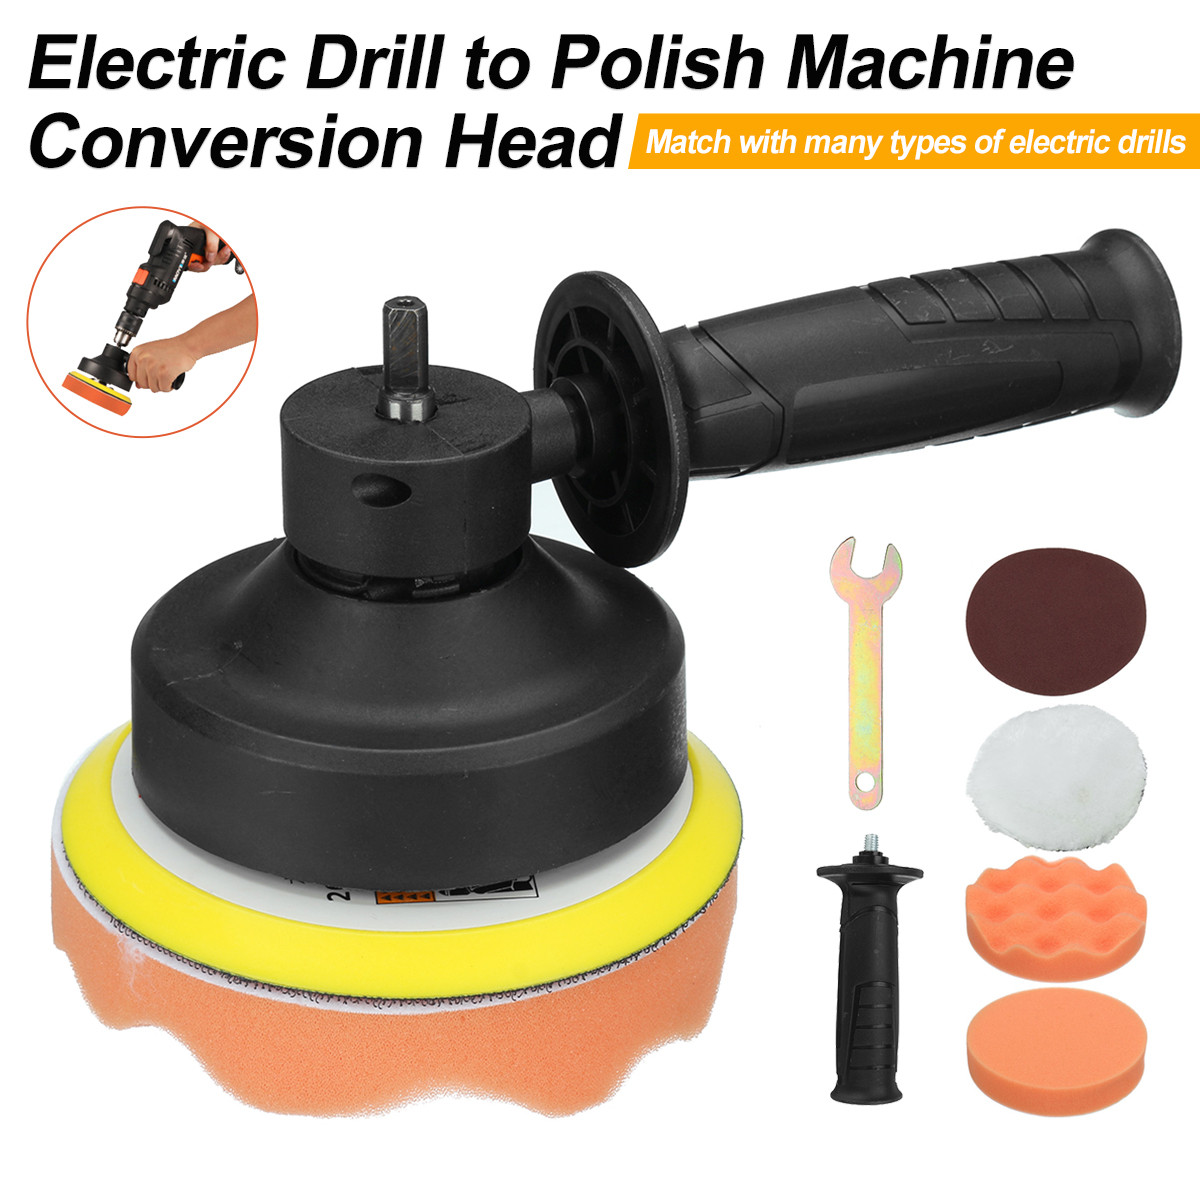 125mm-Electric-Polisher-Accessories-Set-Electric-Drill-to-Polish-Machine-Conversion-Head-For-Polishi-1918289-2